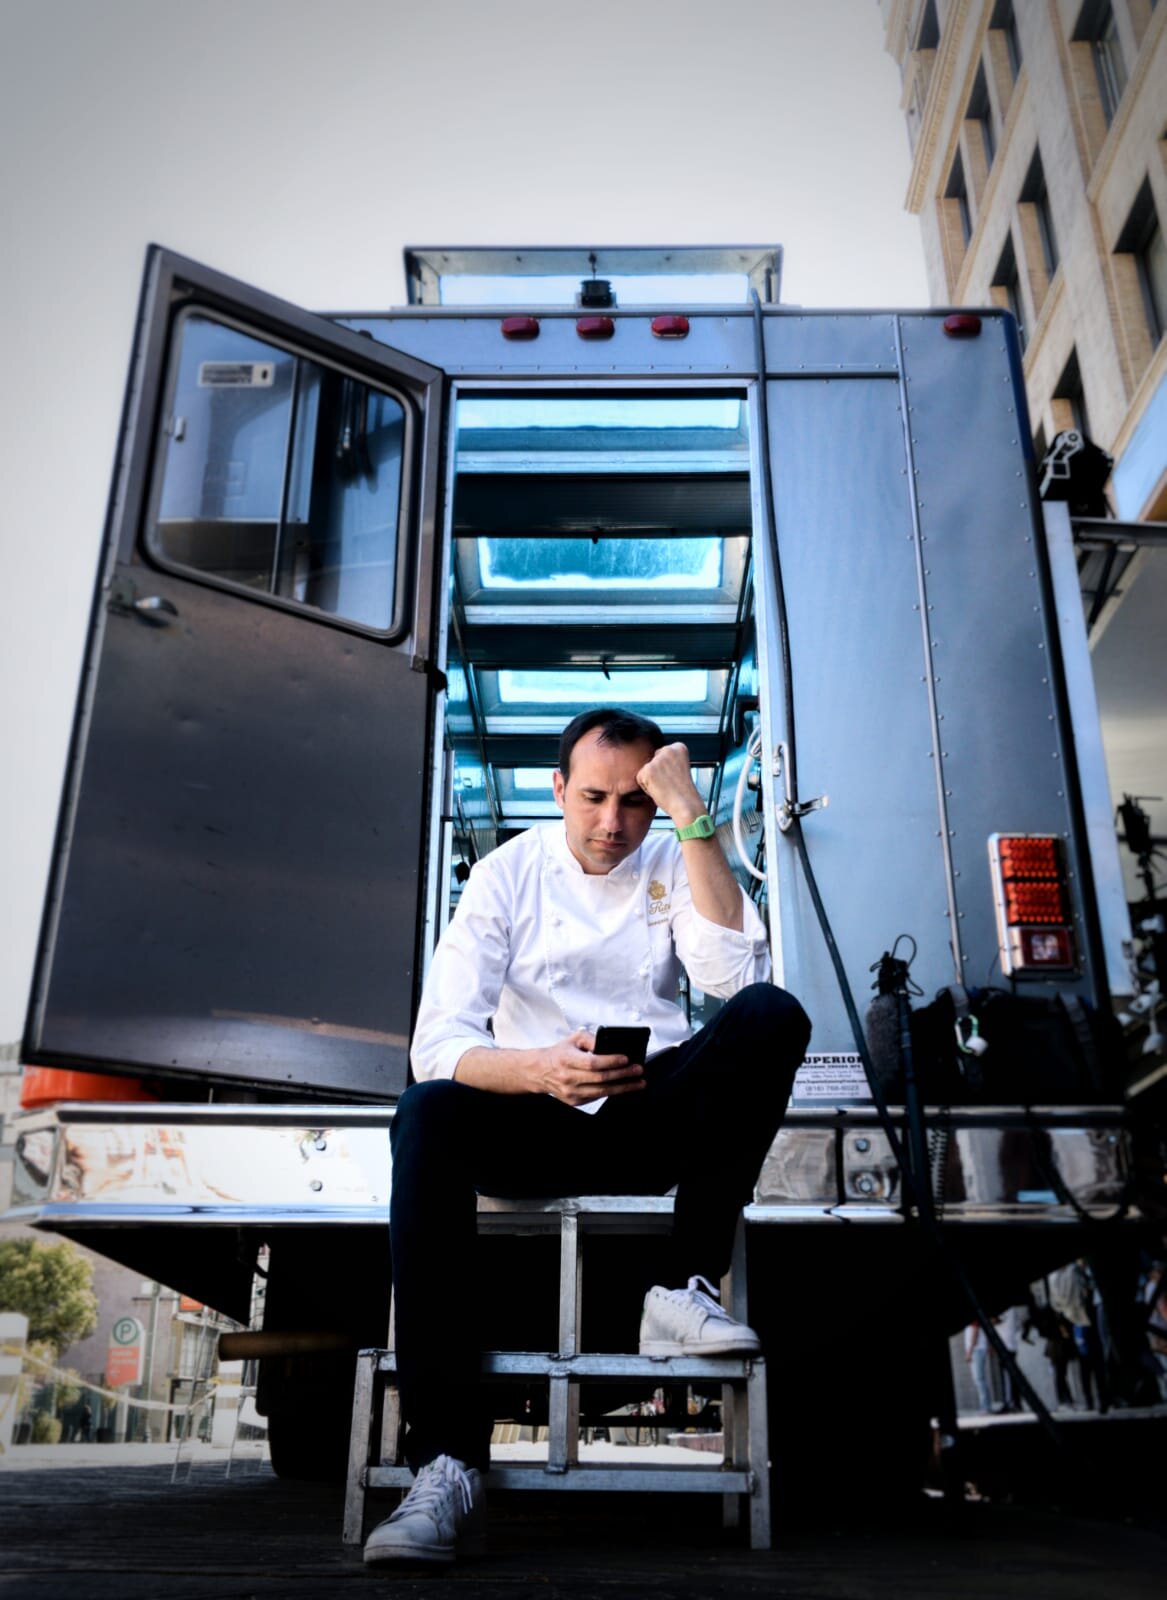 the-chef-in-a-truck-dream-hkcorp-films-eric-nebot-long-series-los-angeles-netflix-documentary-metrage-hook-lab-12.jpeg